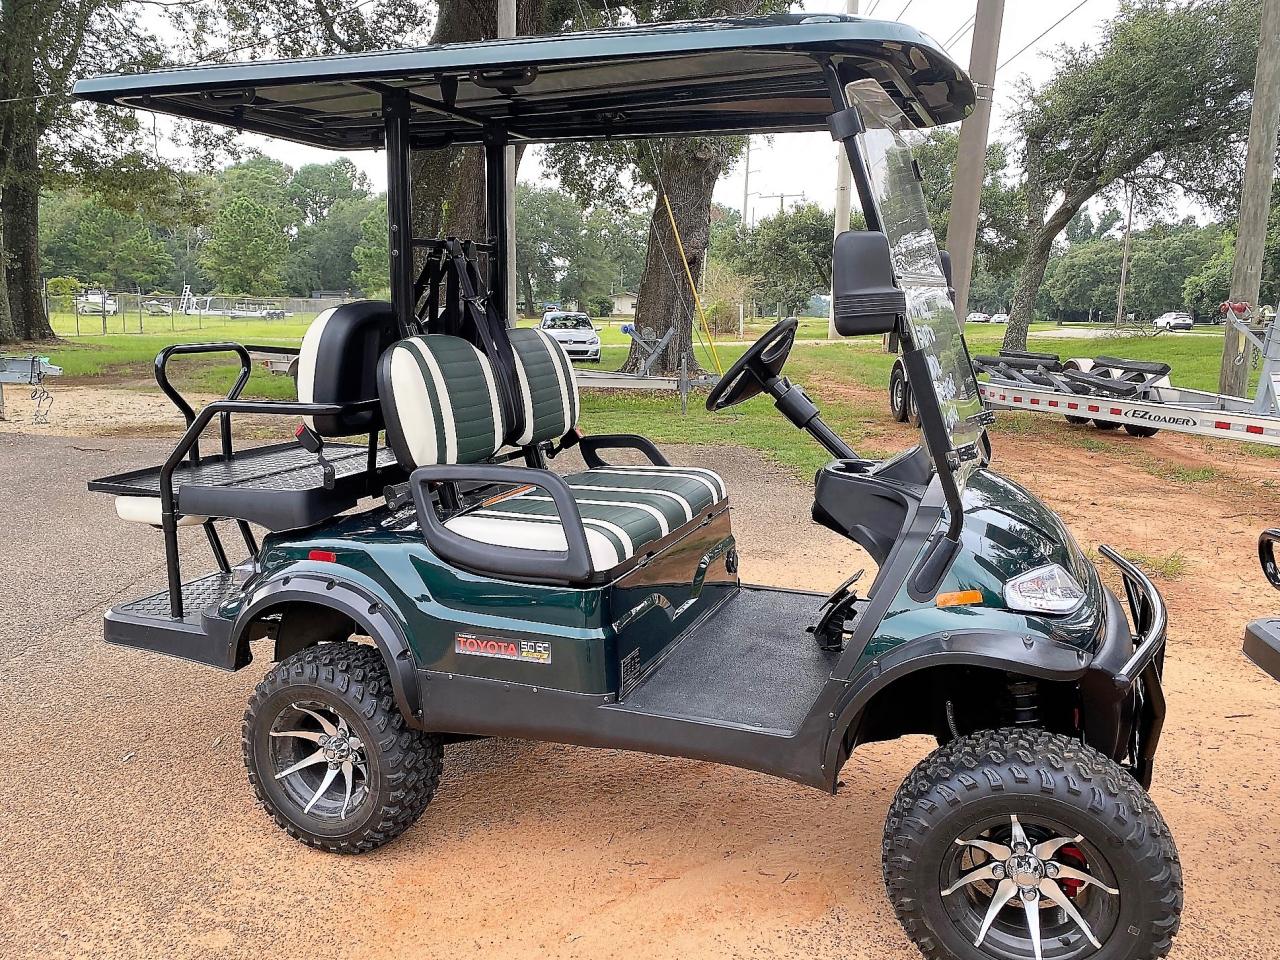 Used Golf Carts for Sale by Owner in Lawrence, South Dakota: A Buyer's Guide